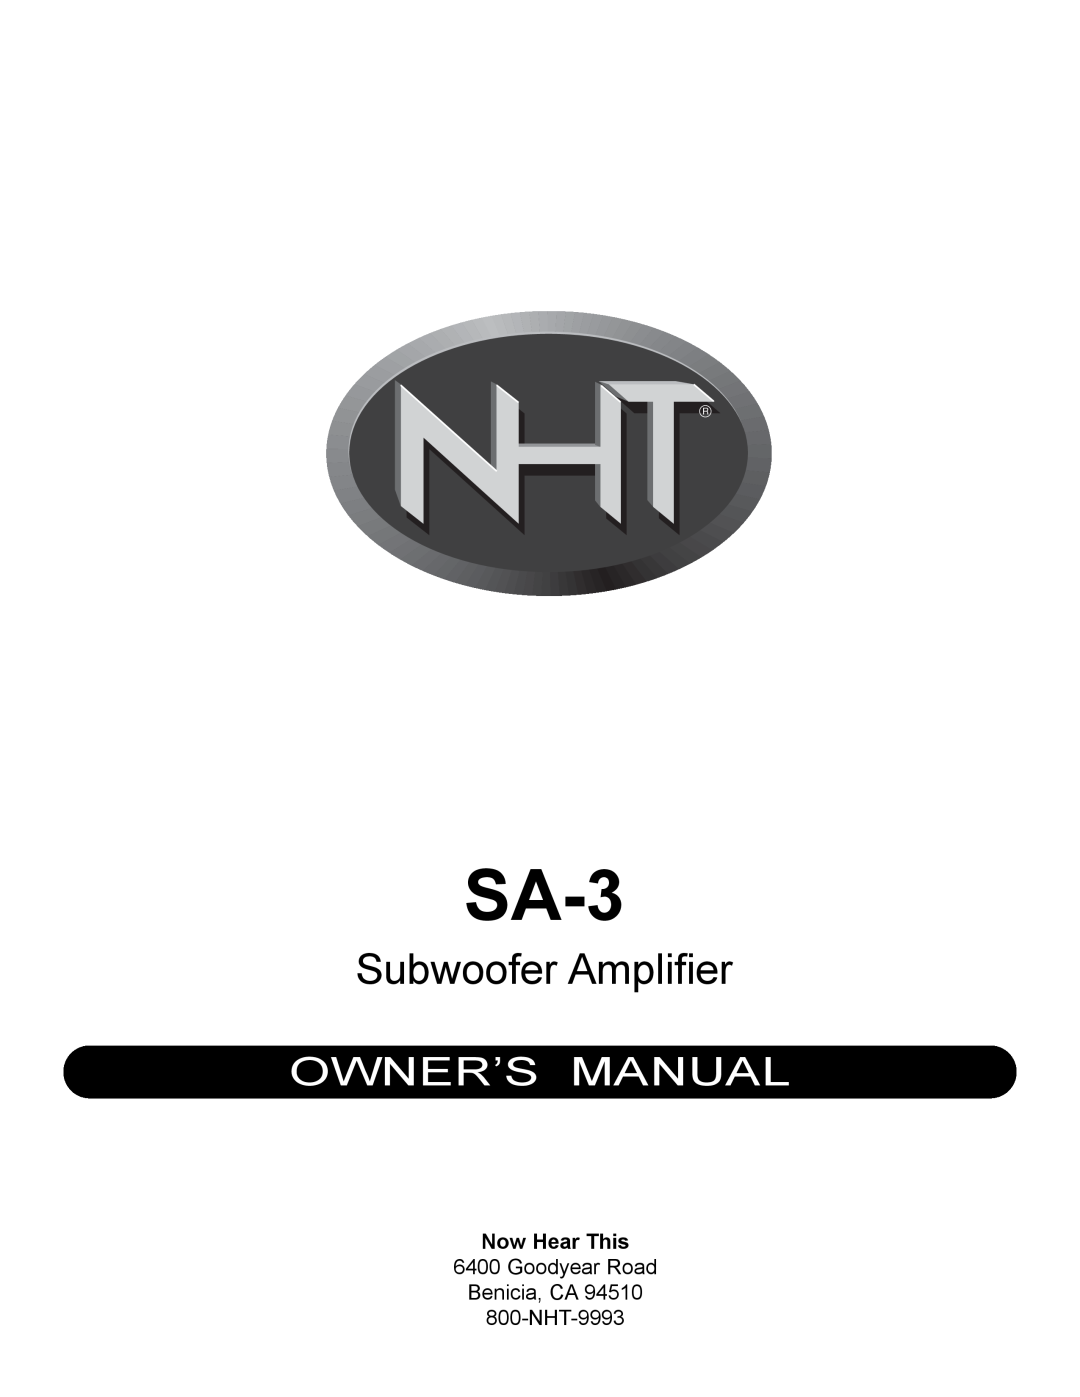 NHT SA-3 owner manual Subwoofer Amplifier, Owner’S Manual, Now Hear This 